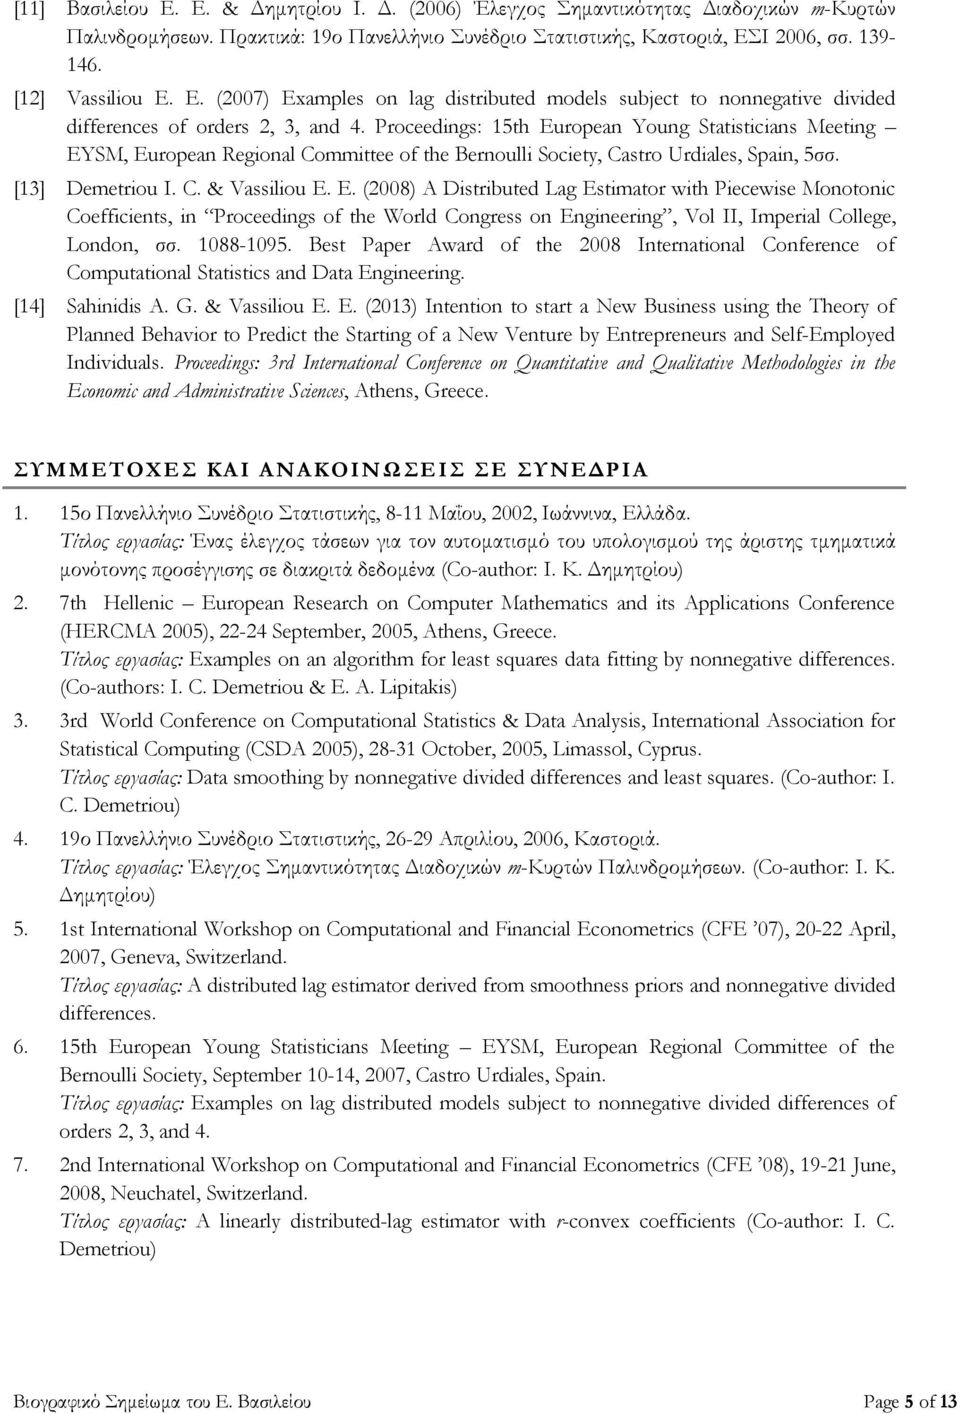 Proceedings: 15th European Young Statisticians Meeting EYSM, European Regional Committee of the Bernoulli Society, Castro Urdiales, Spain, 5σσ. [13] Demetriou I. C. & Vassiliou E. E. (2008) A Distributed Lag Estimator with Piecewise Monotonic Coefficients, in Proceedings of the World Congress on Engineering, Vol II, Imperial College, London, σσ.